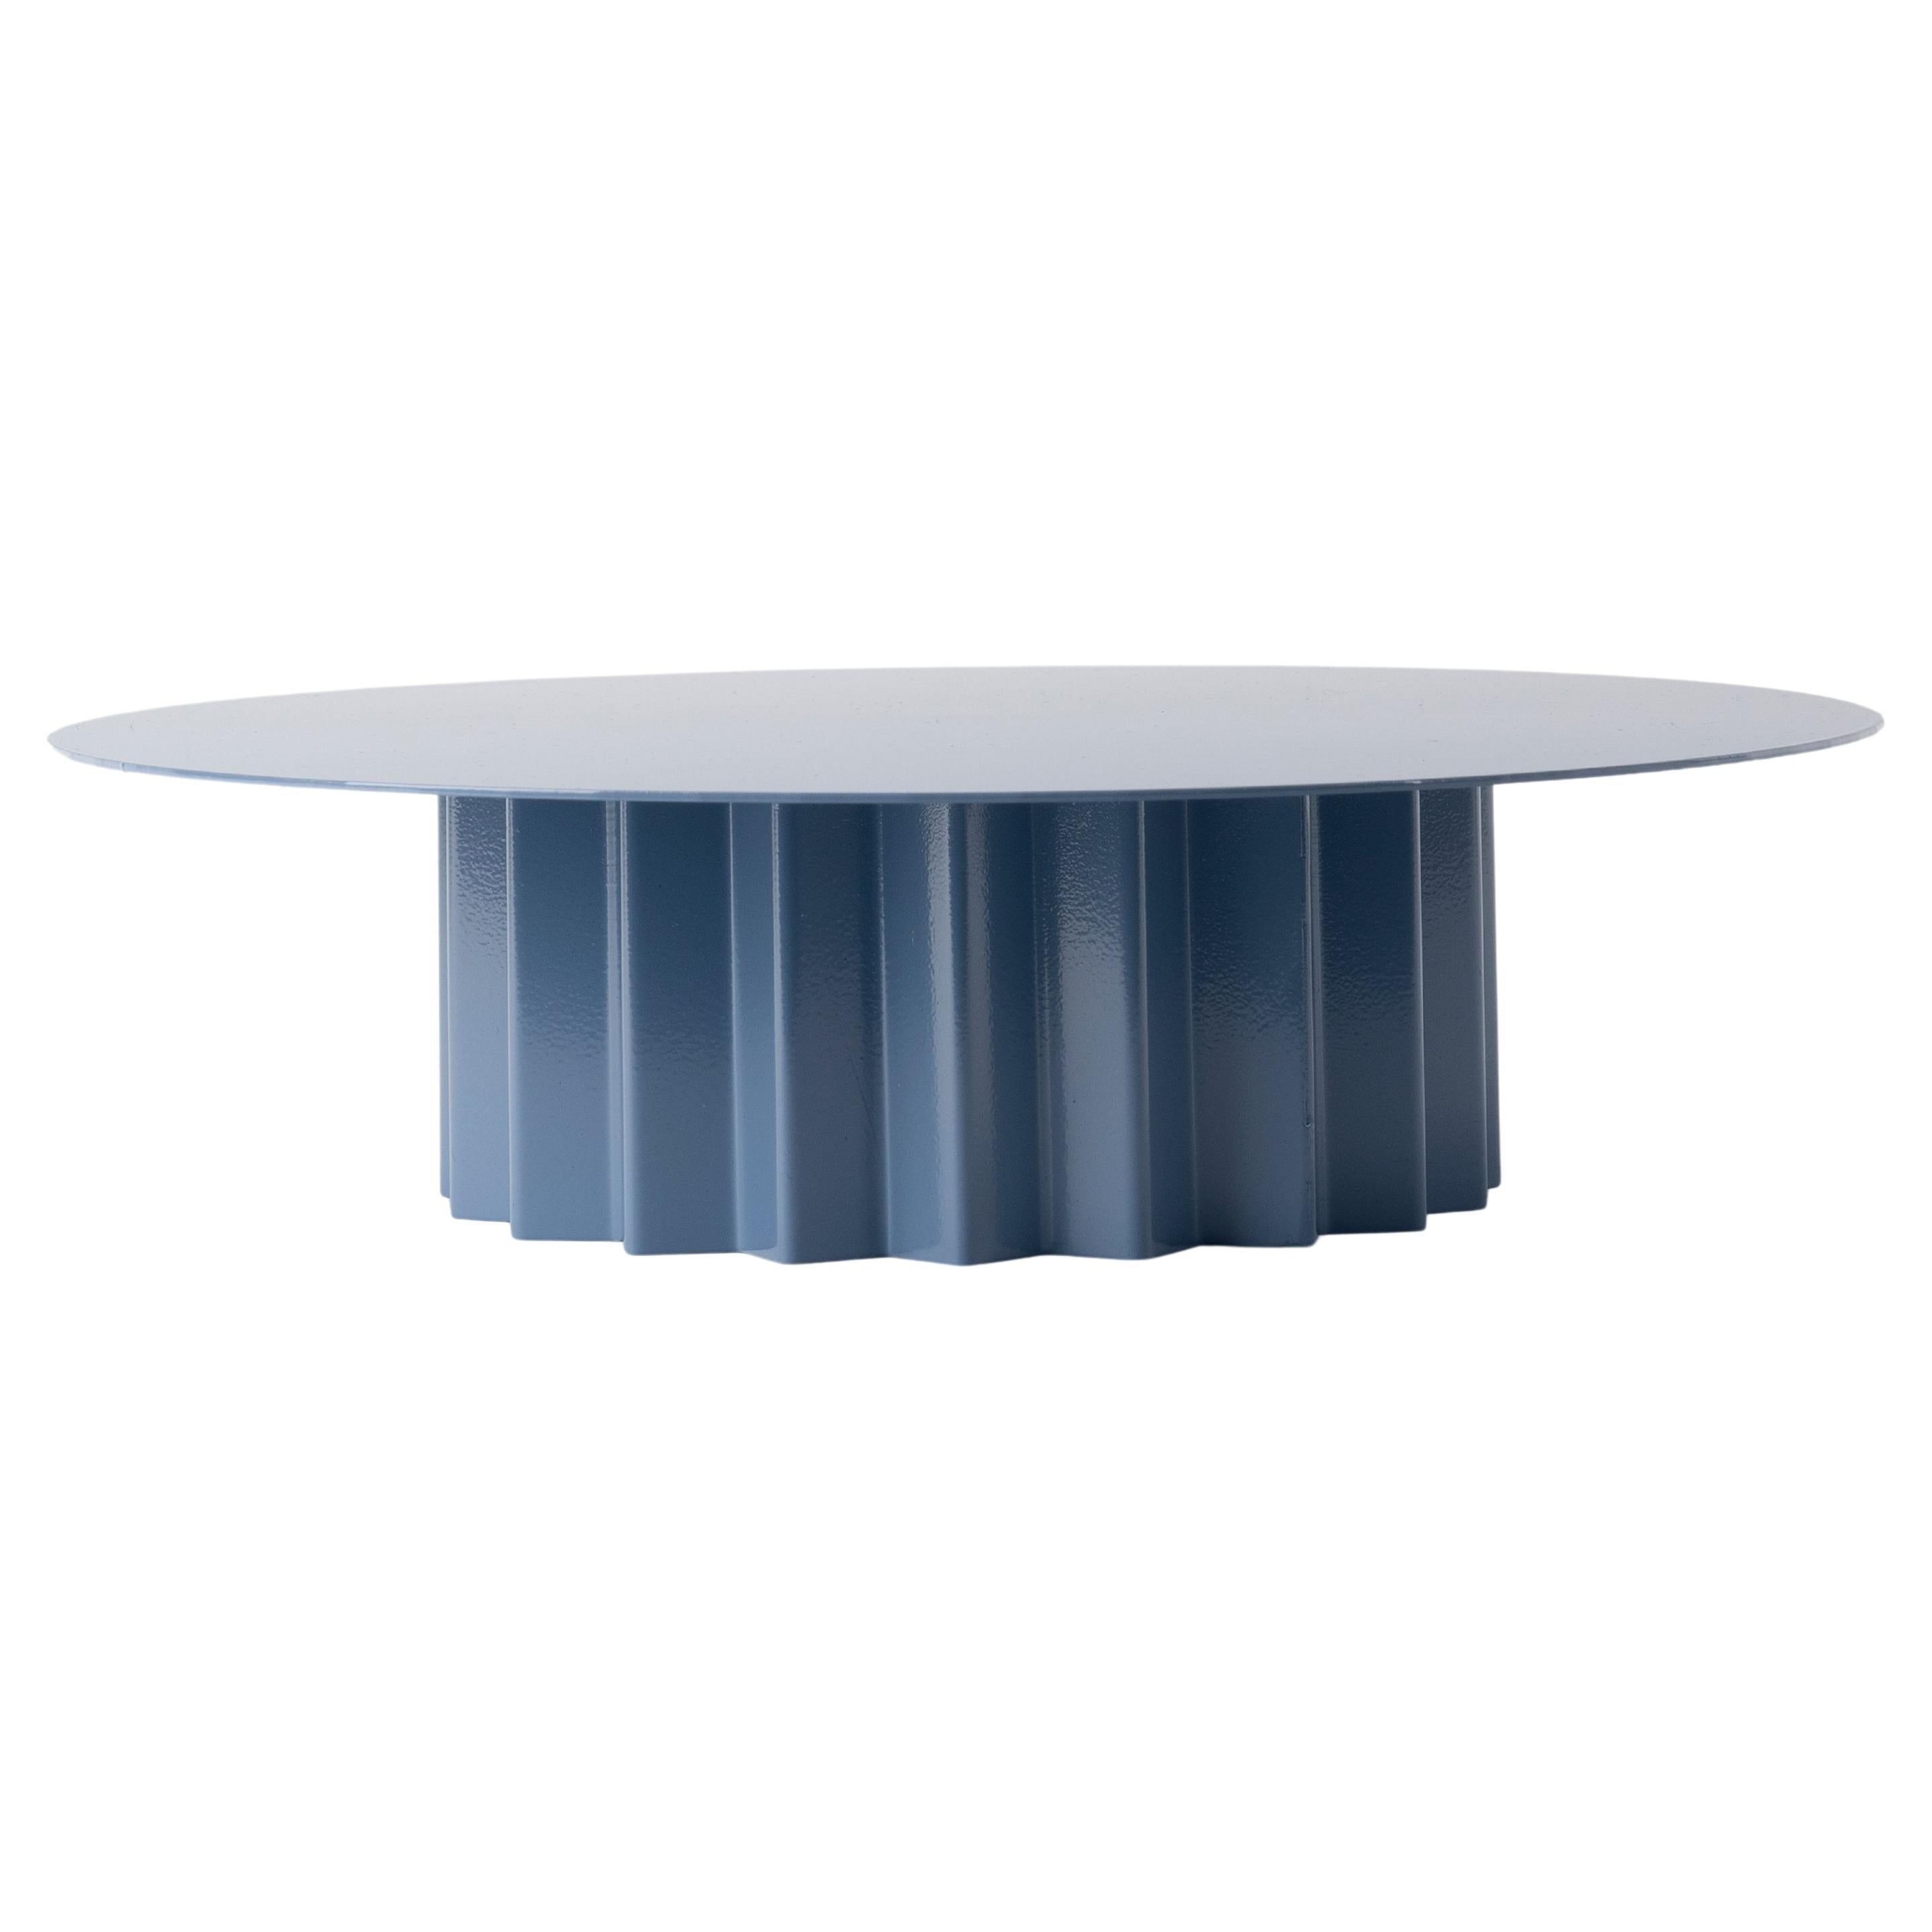 Contemporary Modern, Esnaf Pigeon Blue Round Cake Stand For Sale